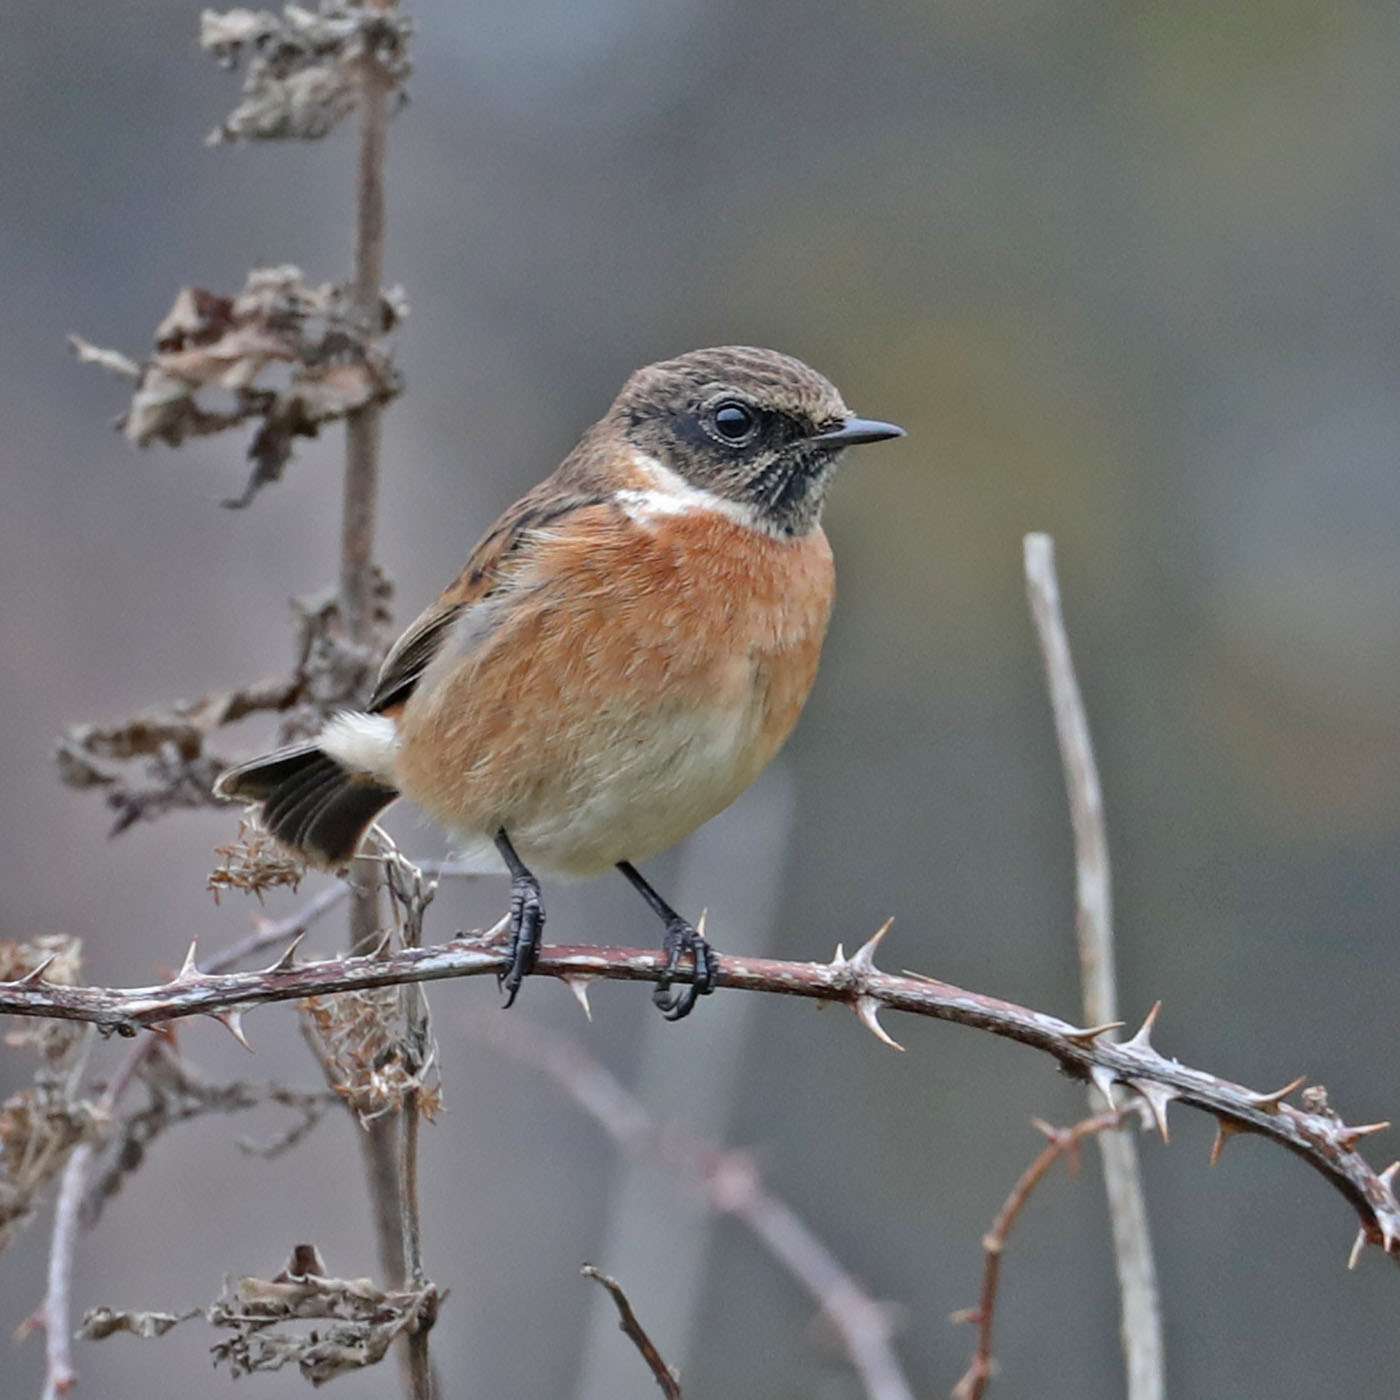 Stonechat by Steve Hopper at Berry Head